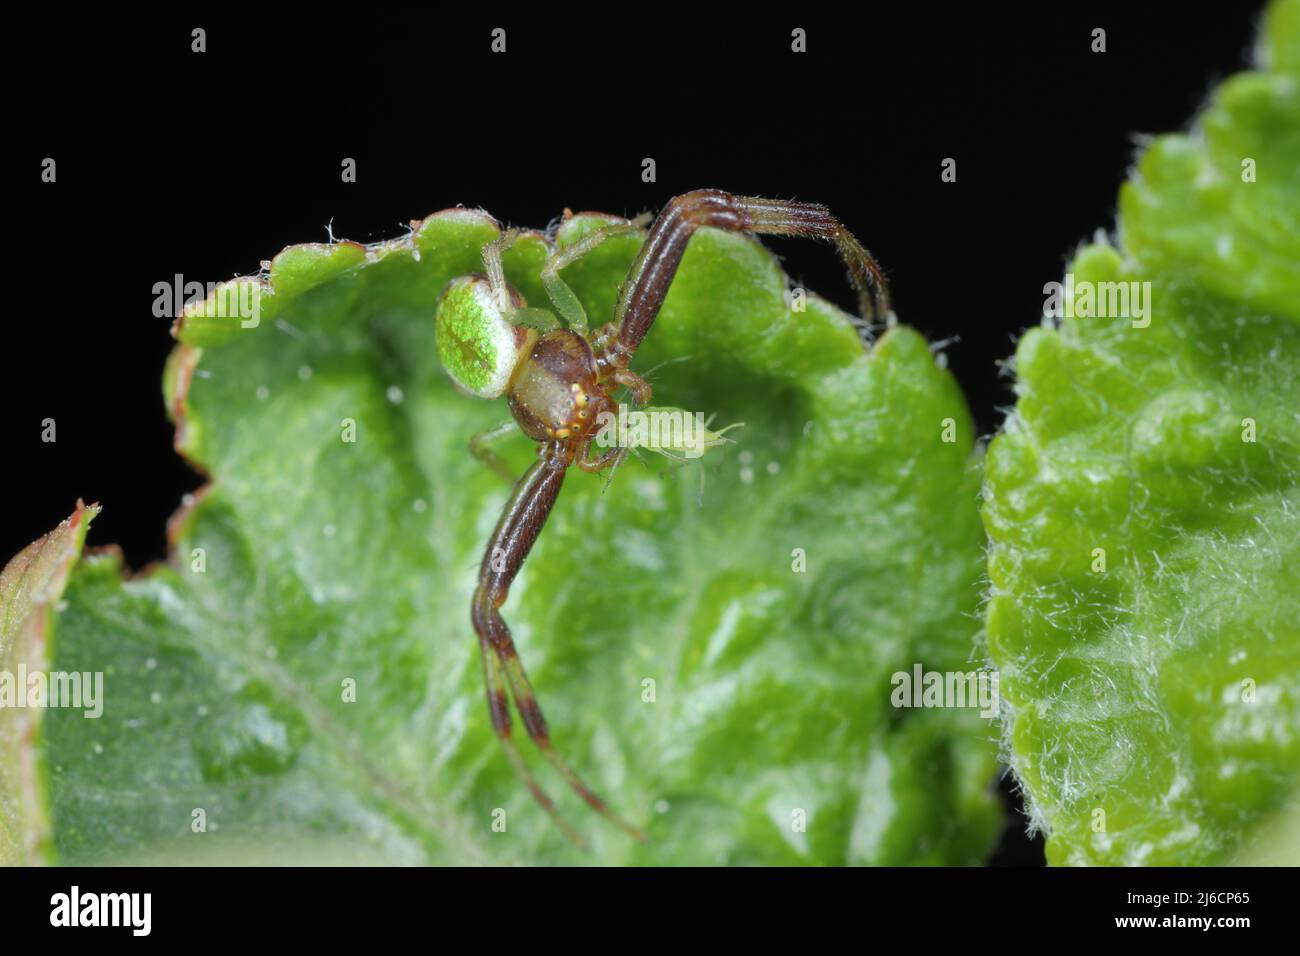 A spider with a hunted aphid on a green leaf. Spiders are natural enemies of many plant pests. Stock Photo